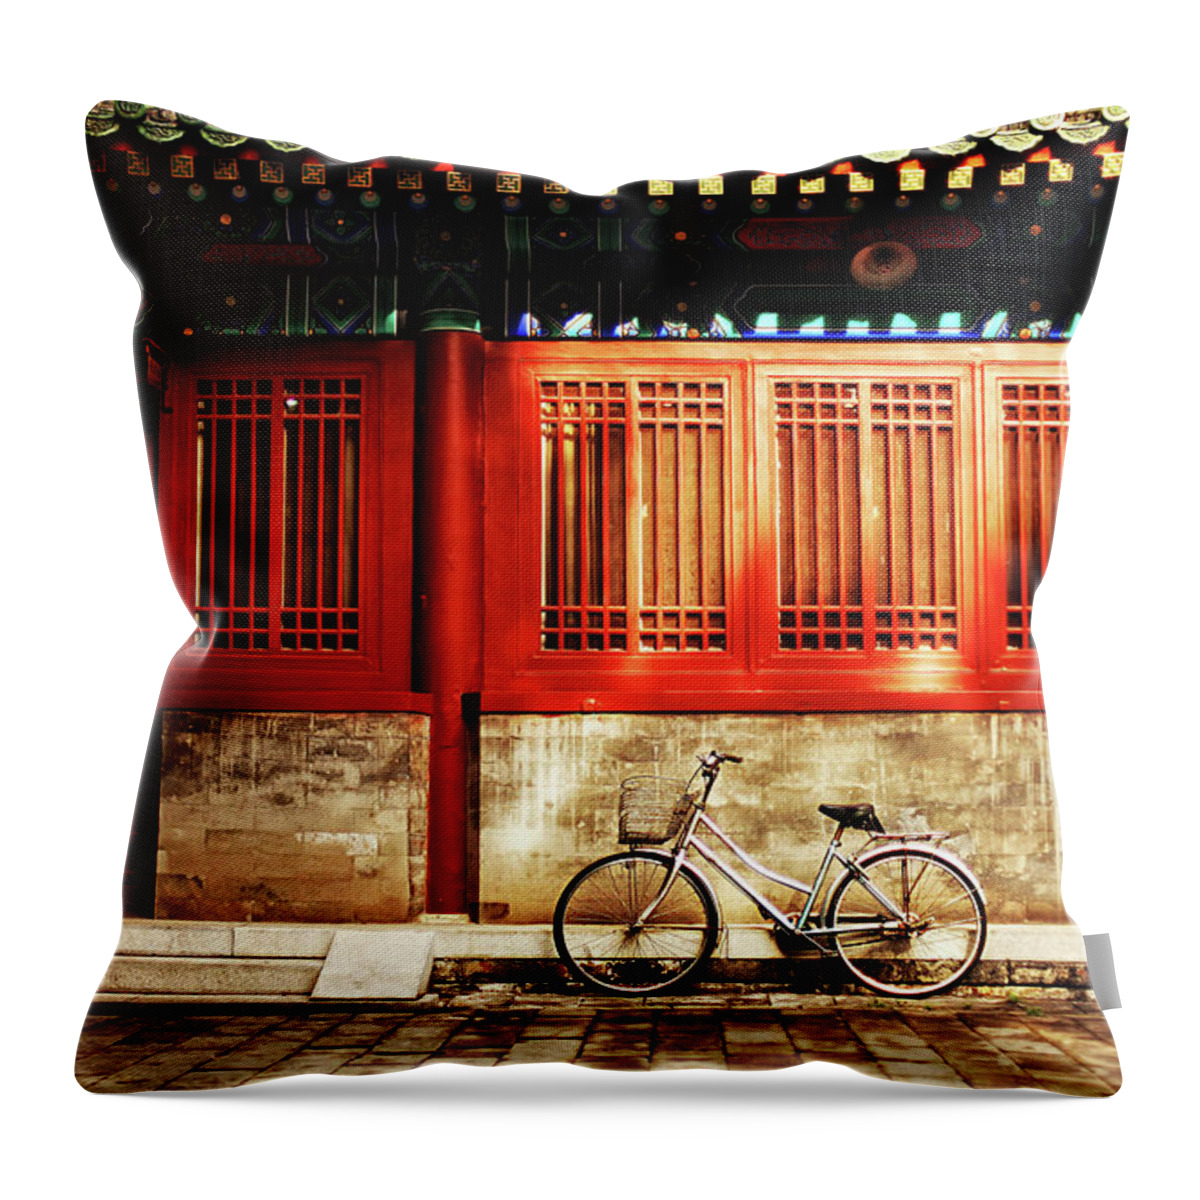 Tranquility Throw Pillow featuring the photograph Bicycle In Sunlight At Confucius Temple by Nicole Kucera